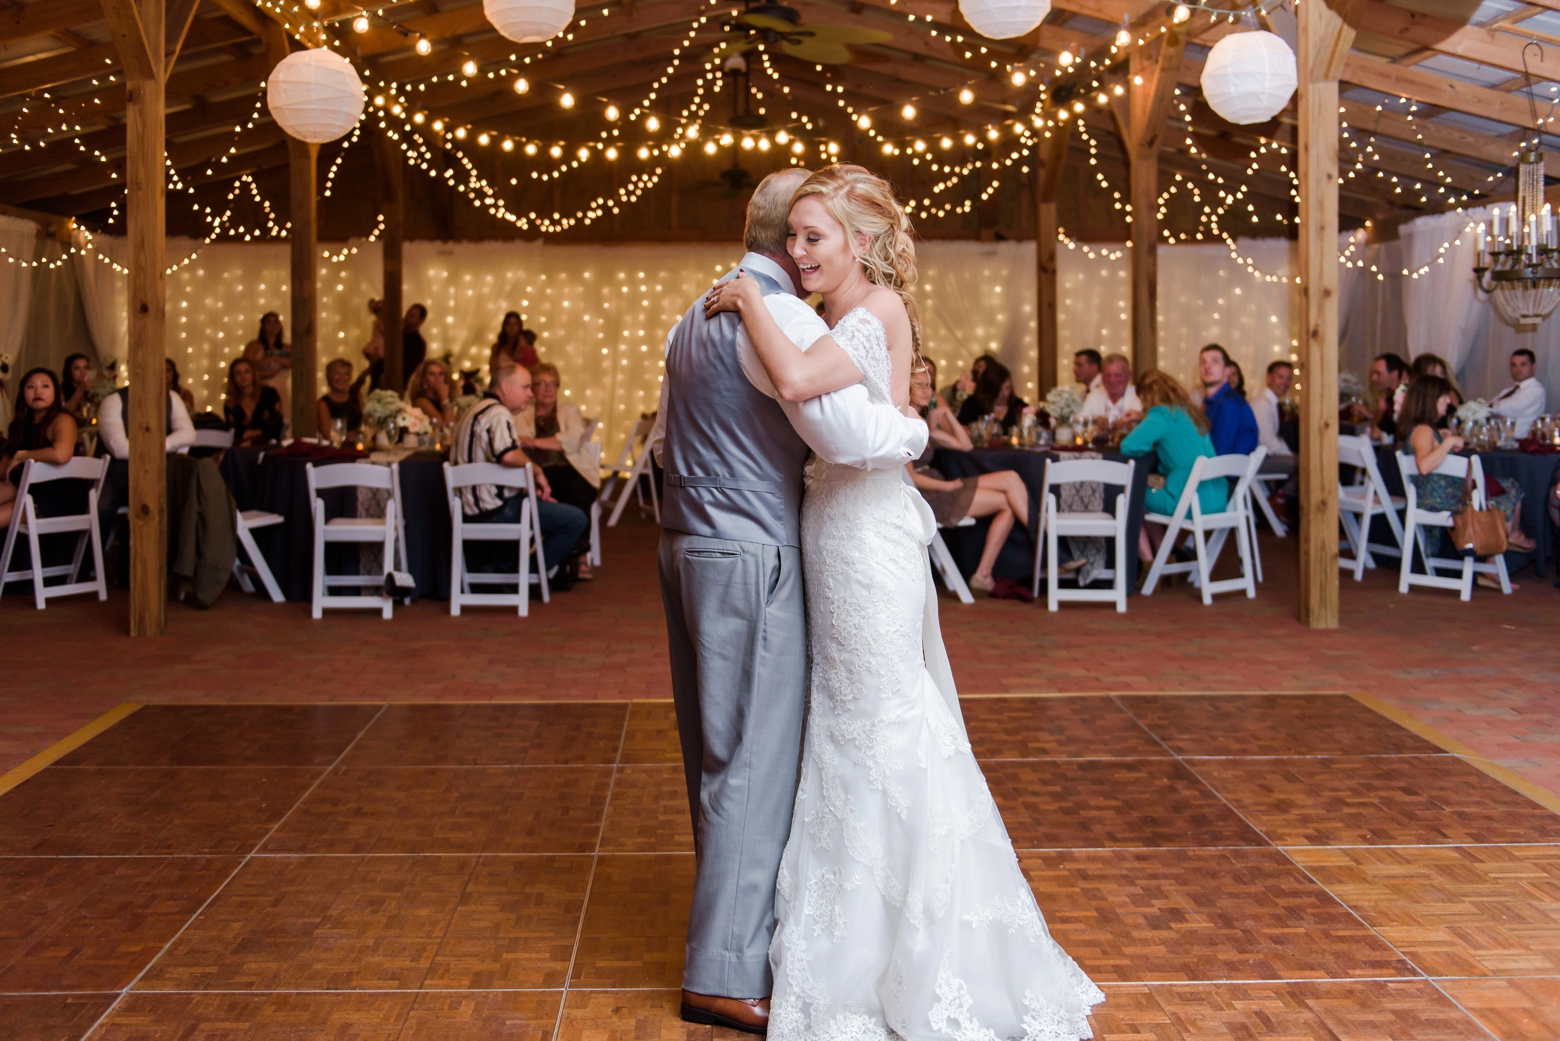 The father daughter dance under the twinkle lights in the barn at Cross Creek Ranch